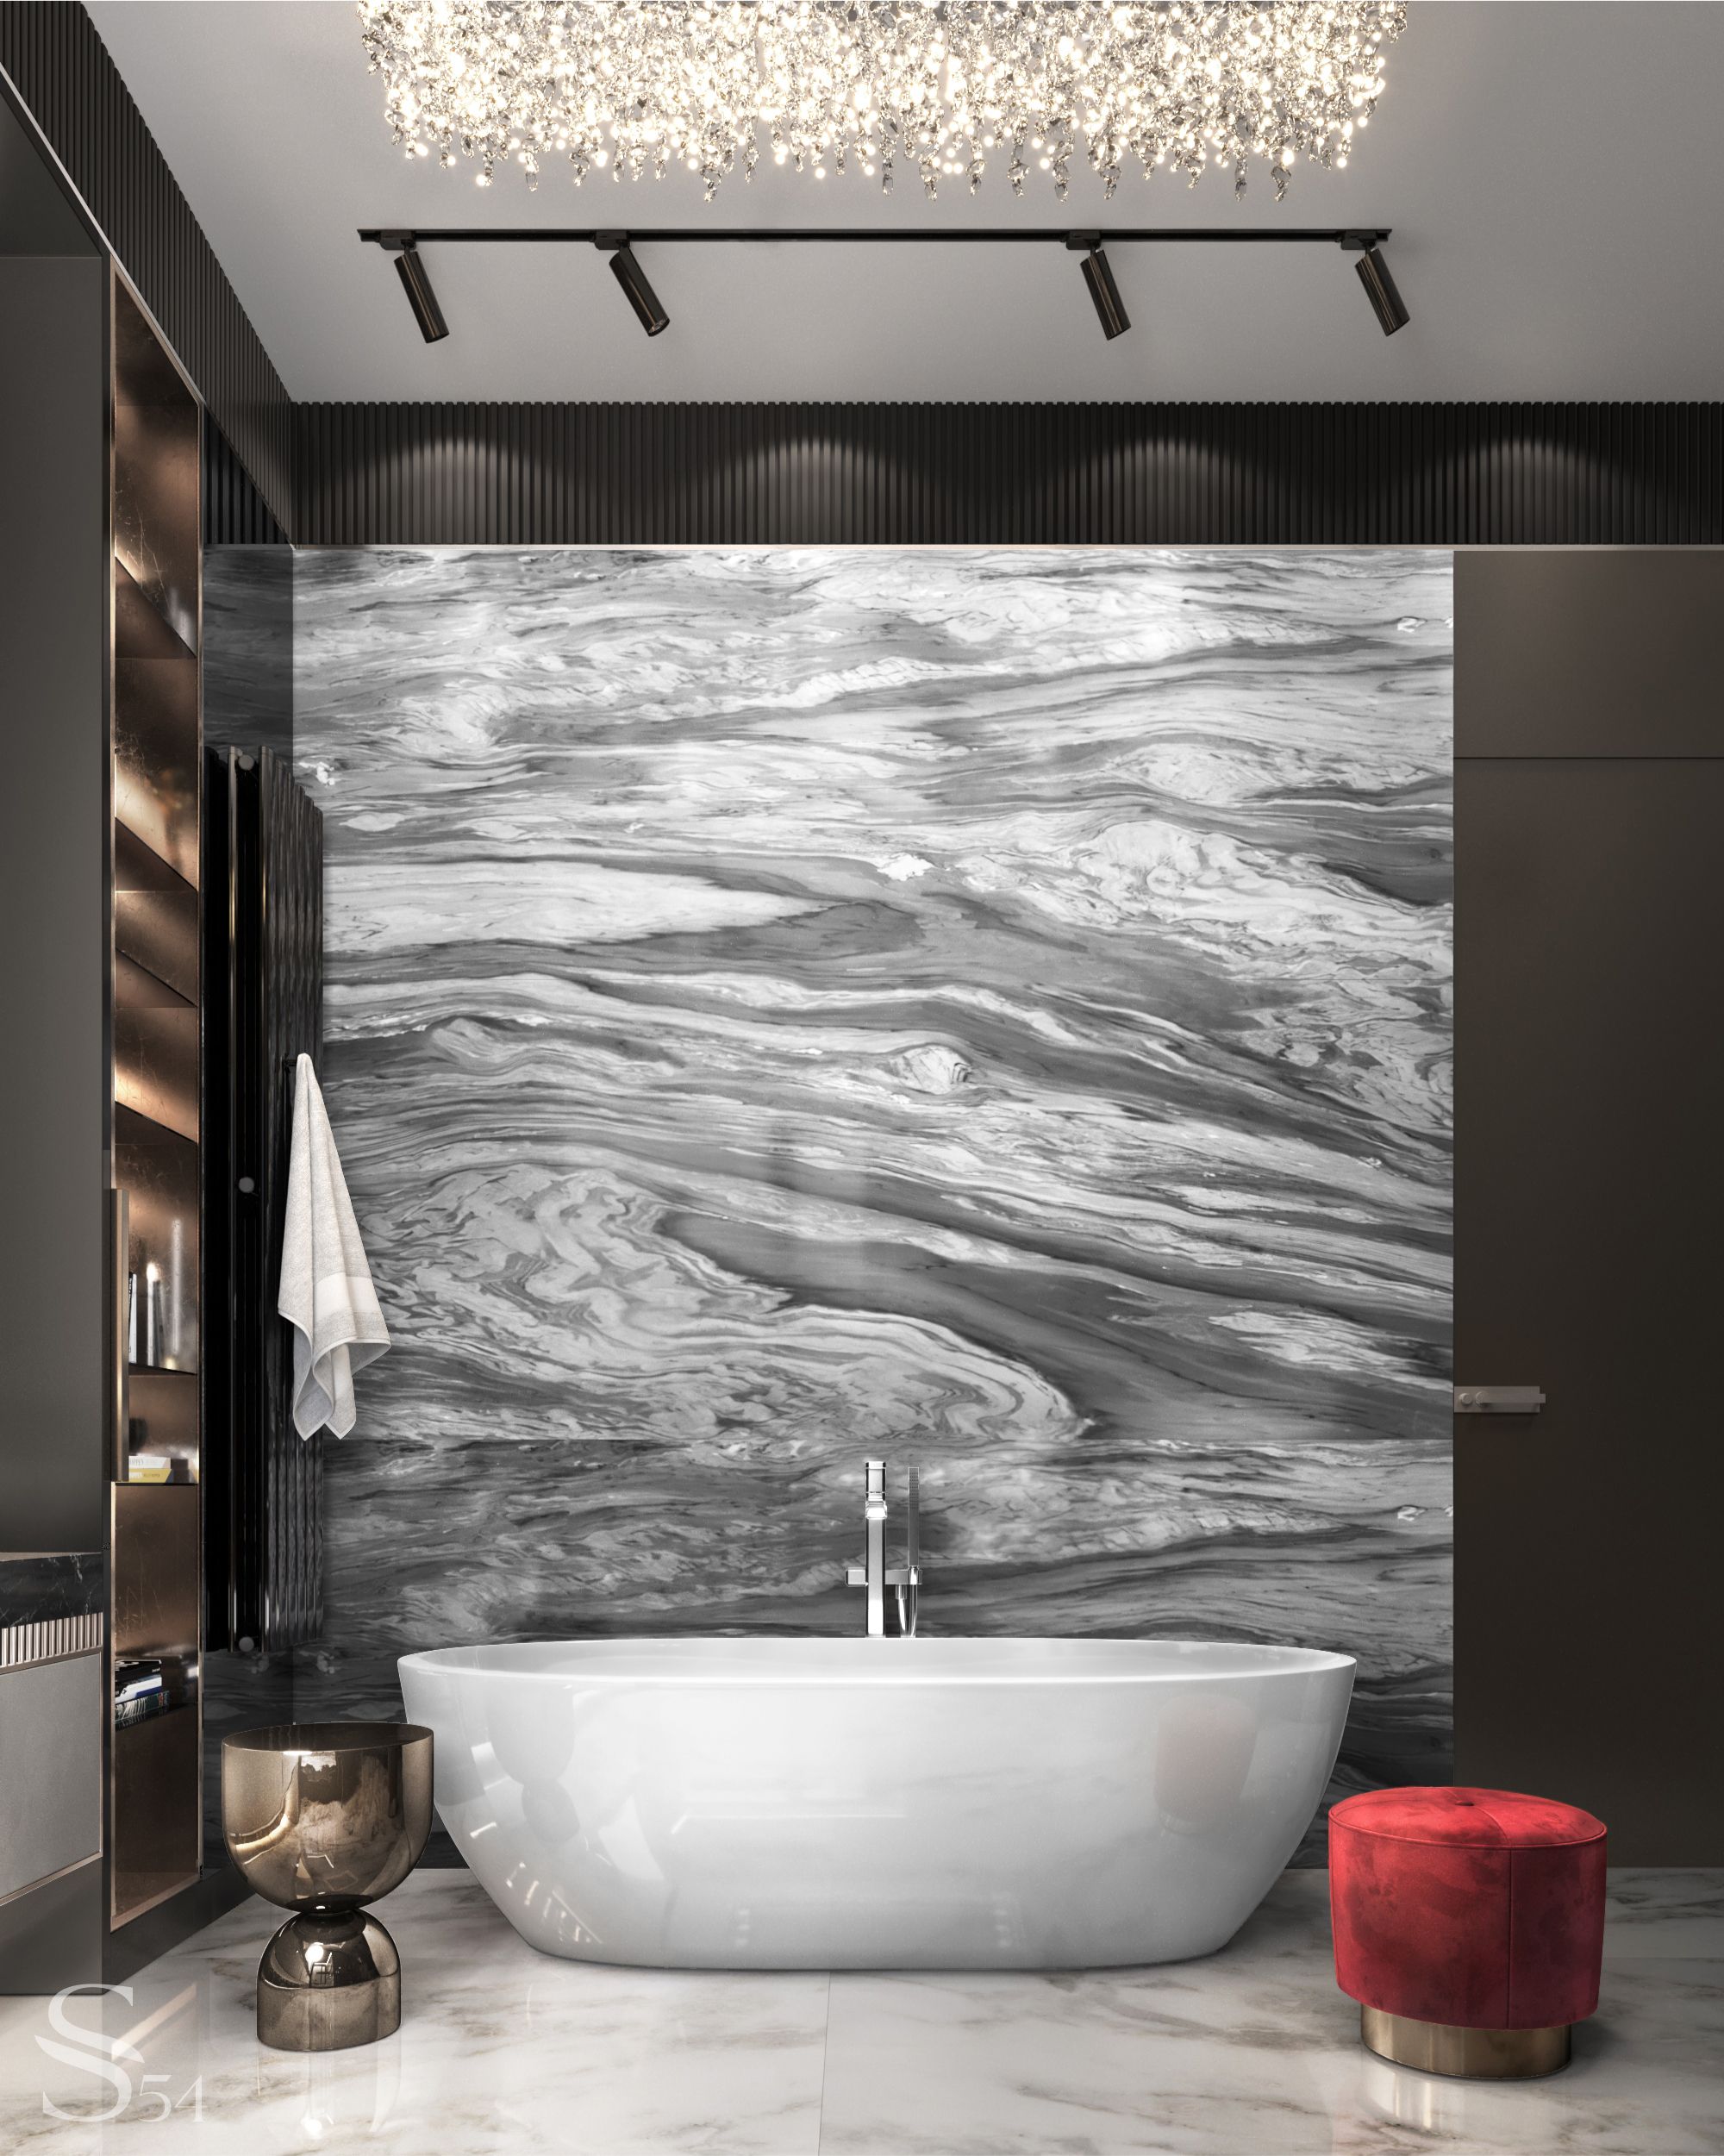 
An important aspect of the master bathroom design is an individual approach, as the height of sinks, storage compartments, and lighting modes should suit the users.